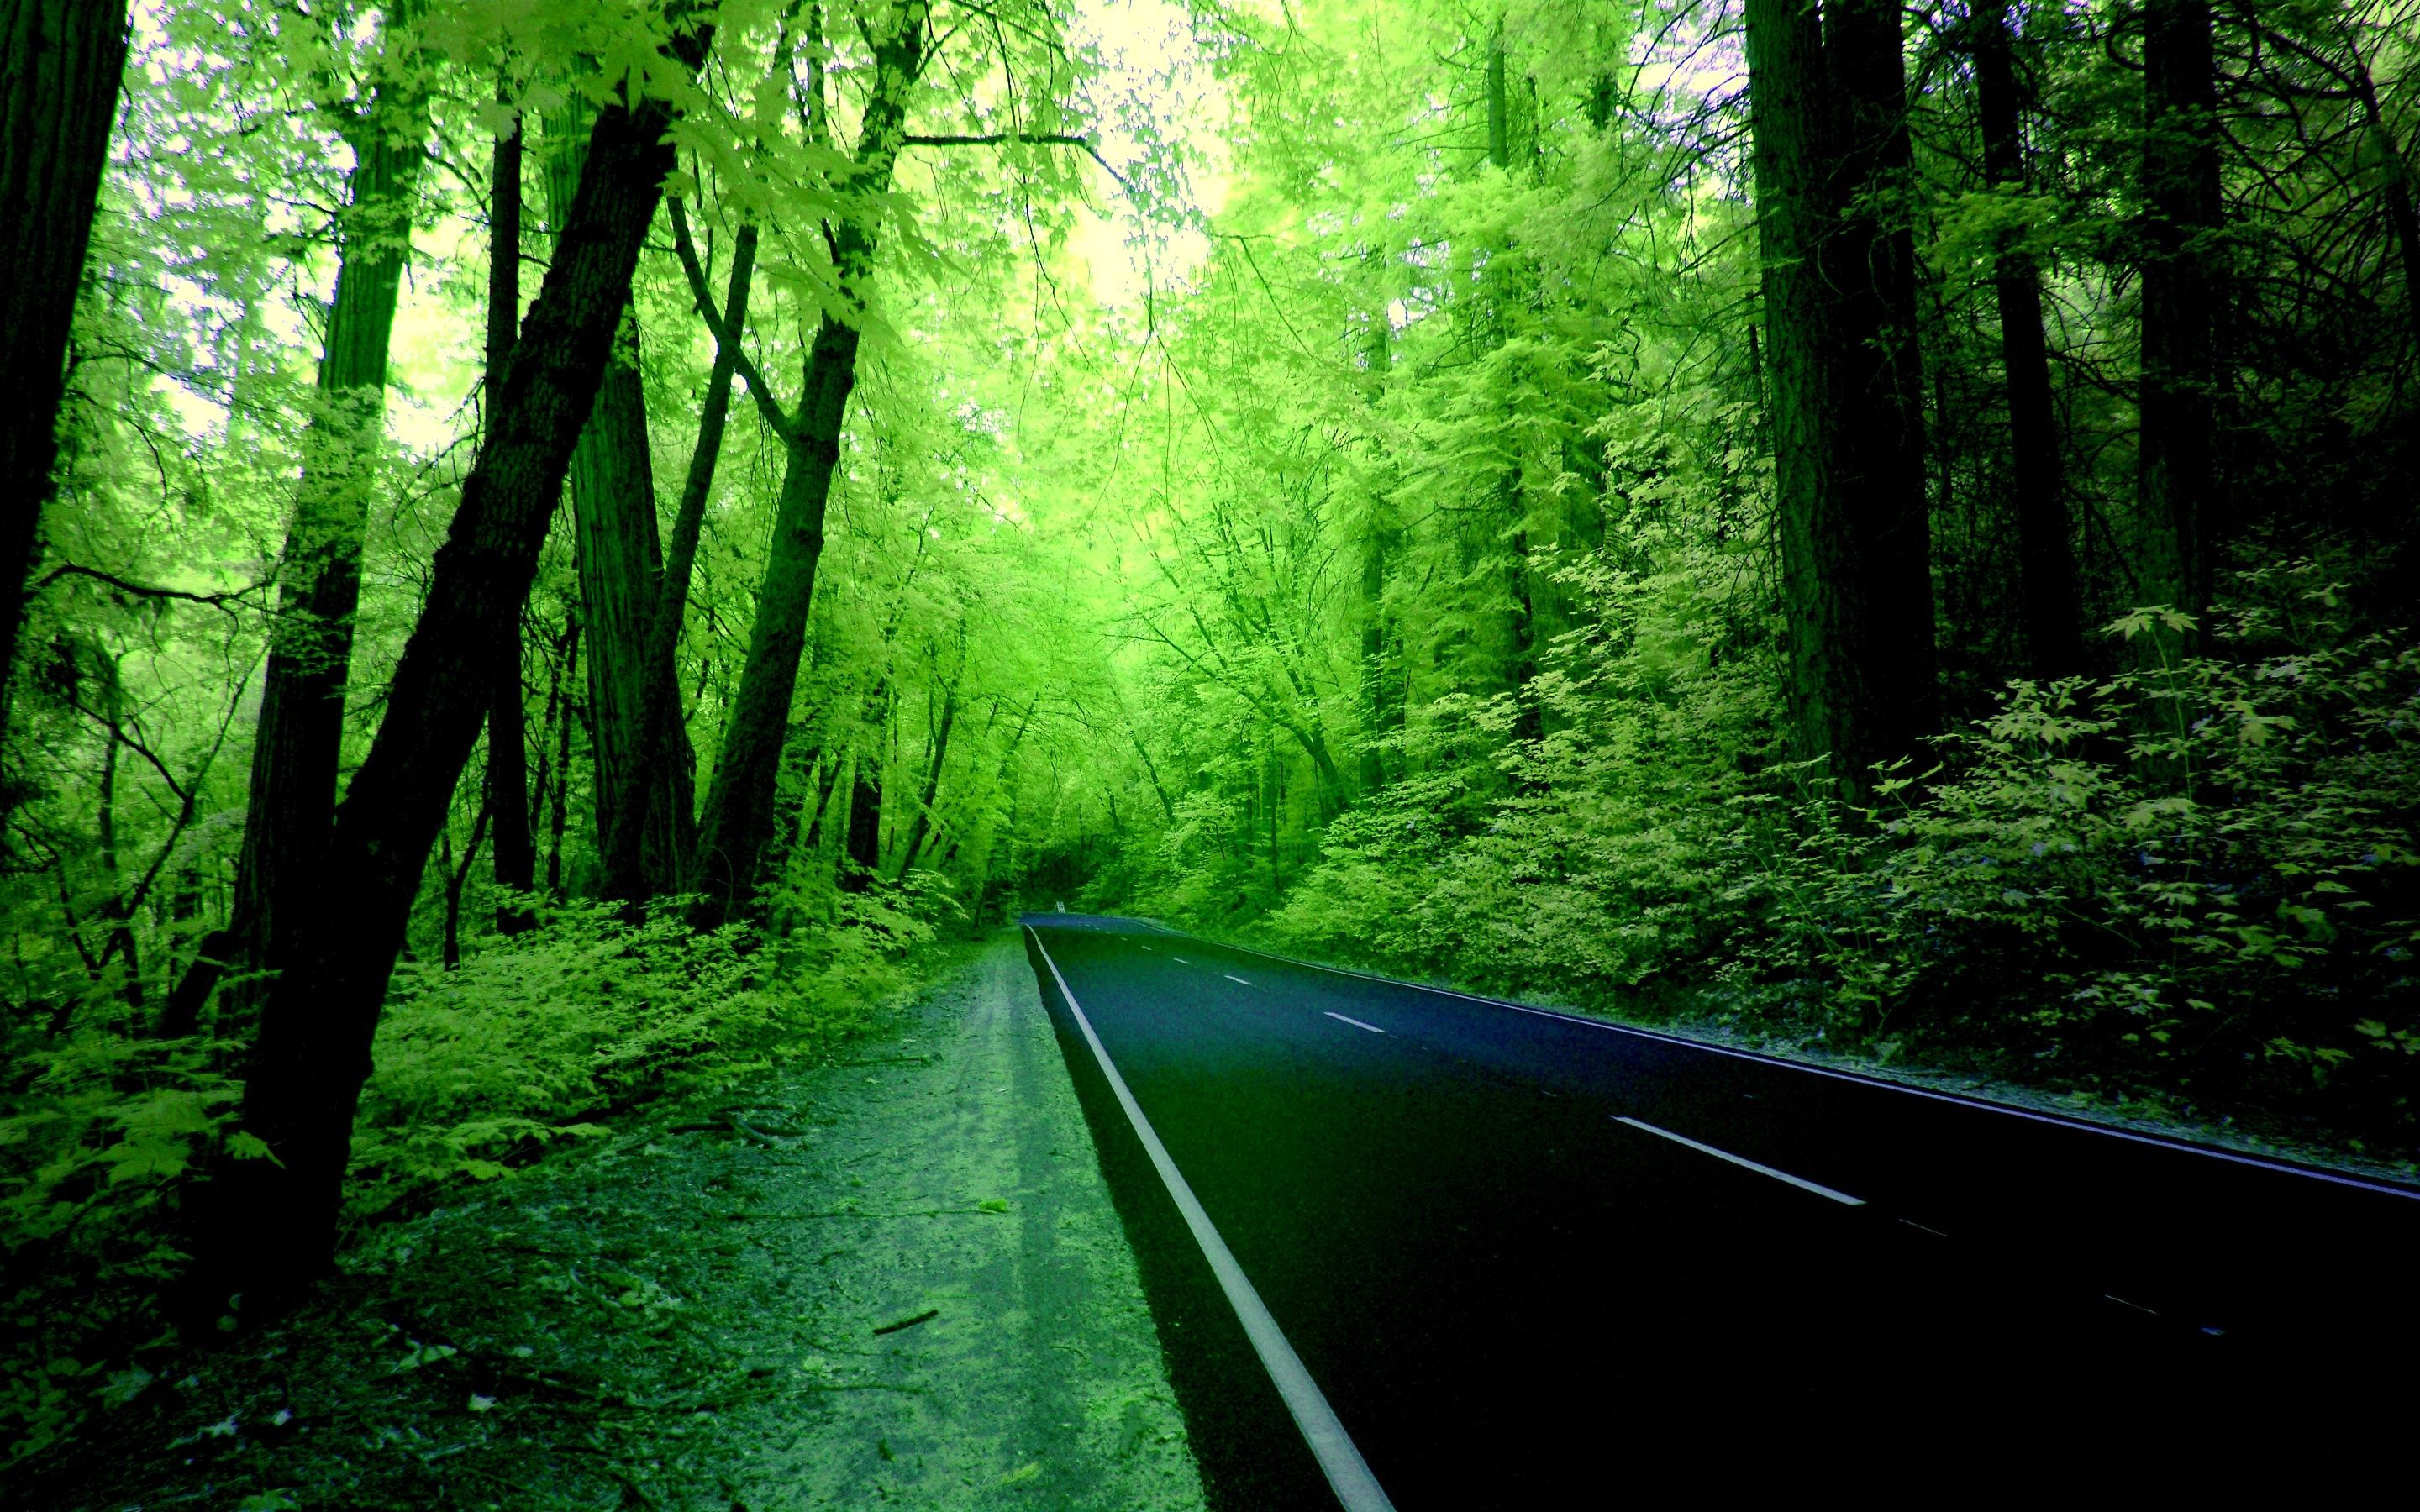 Green Forest Wallpaper Hd Background 9 Hd Wallpapers 2880x1800